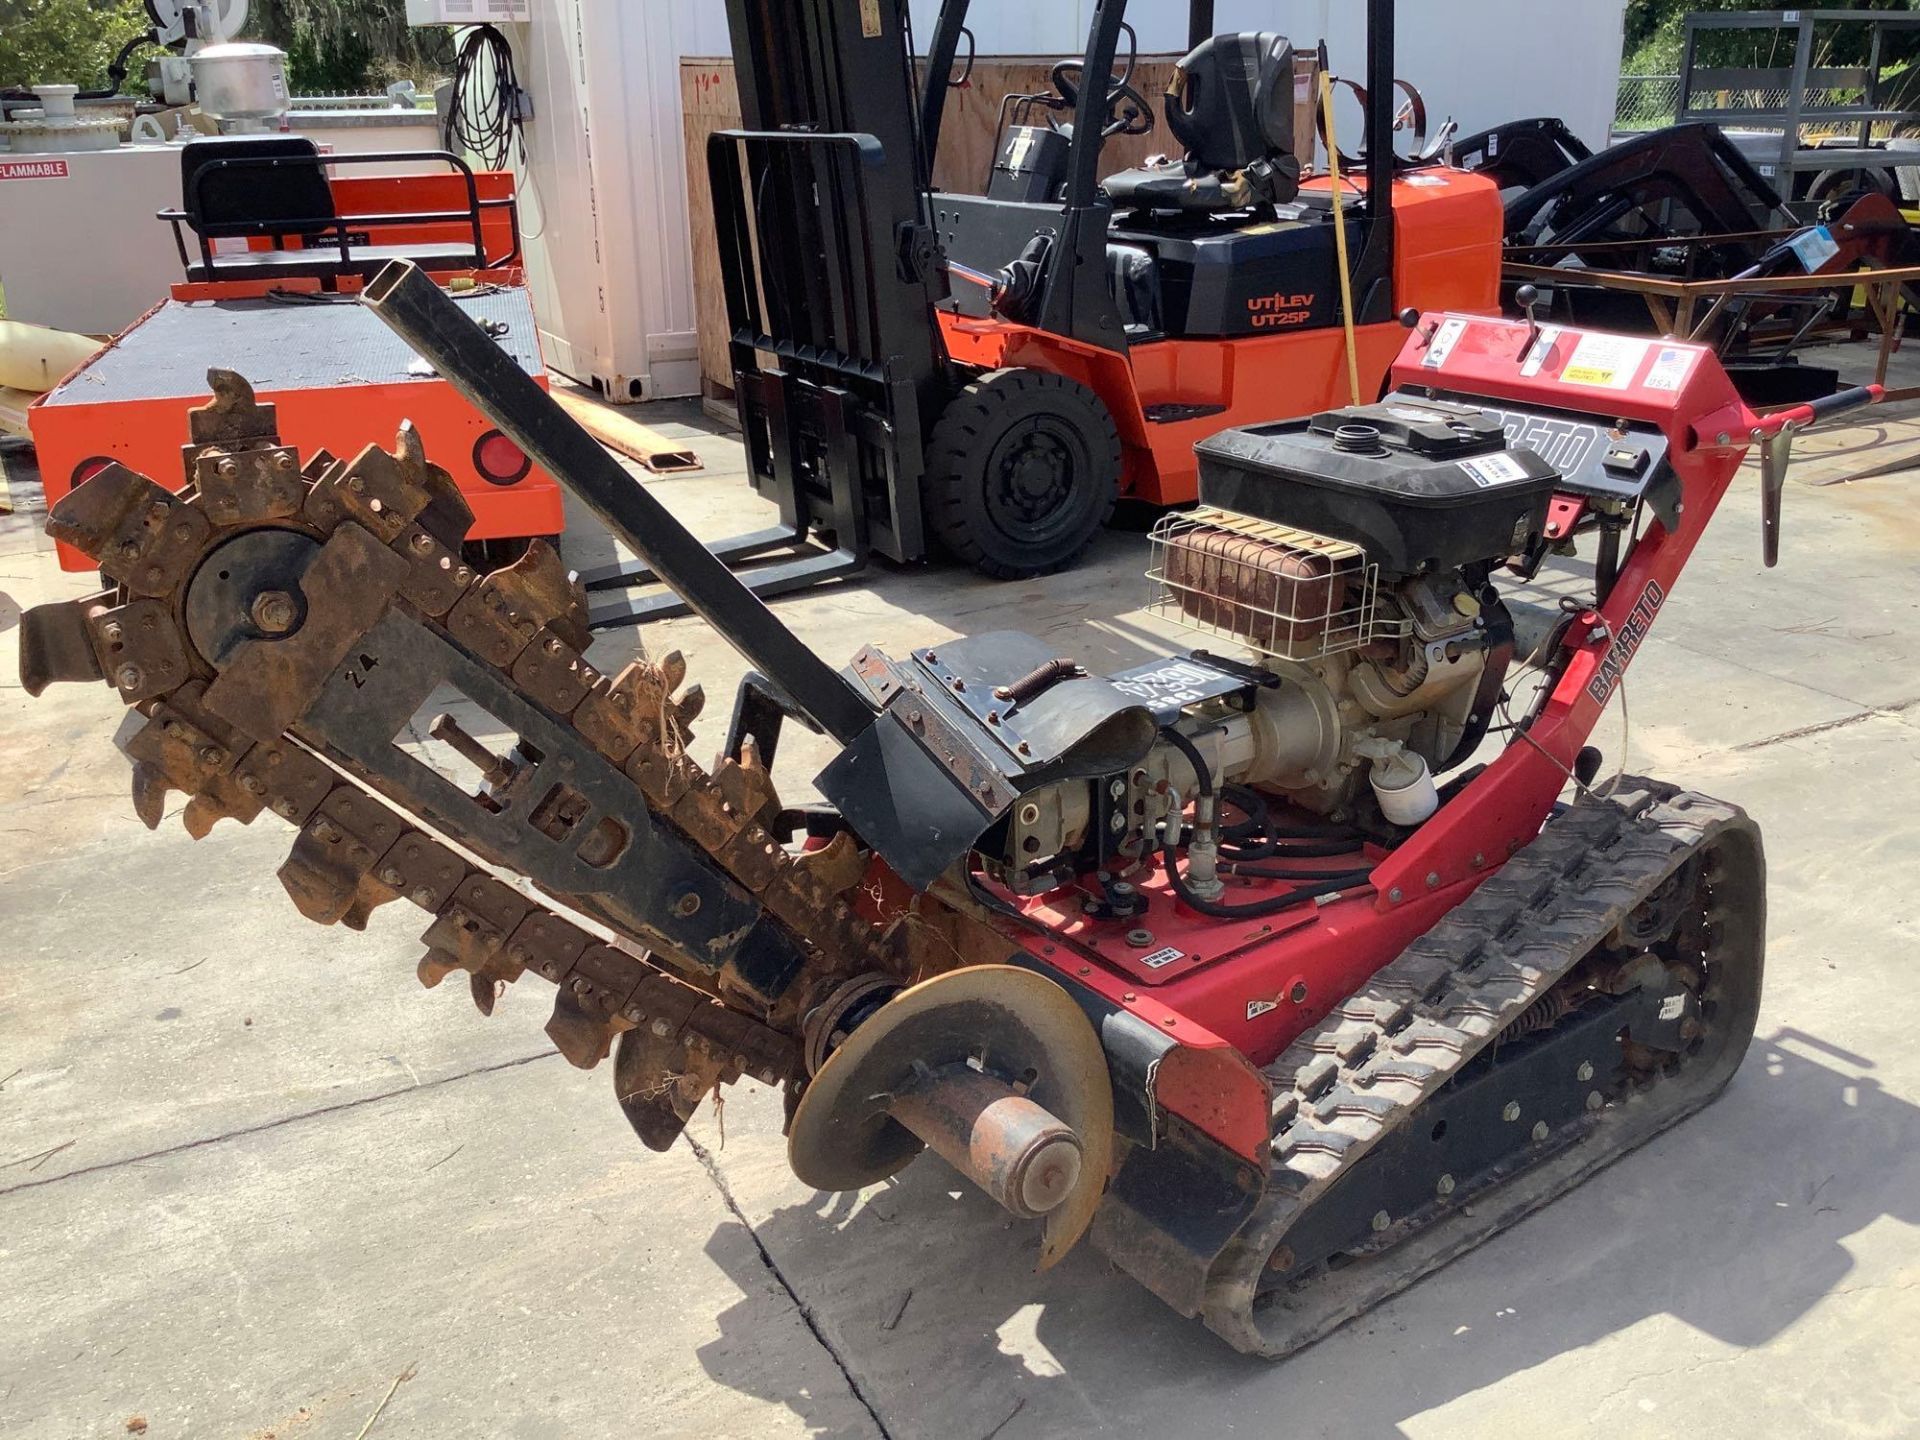 BARRETO 1624-TK WALK BEHIND TRENCHER , GAS POWERED, BLADE APPROX 24”, RUBBER TRACKS, RUNS & OPERATES